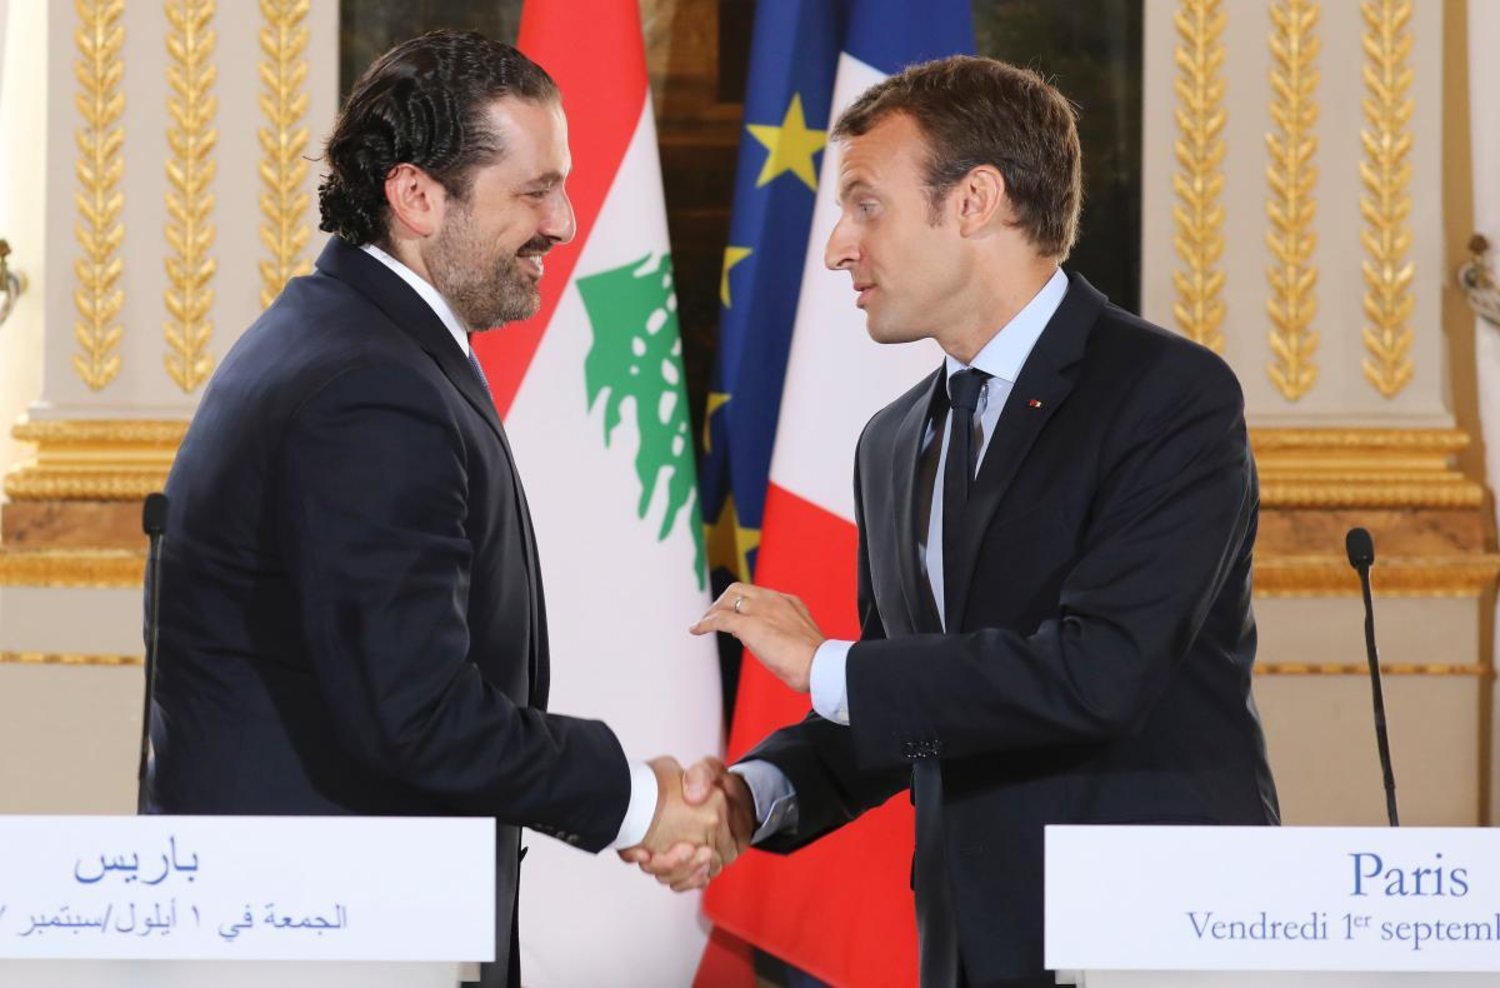 FILE - In this Sept. 1 2017 file photo, French President Emmanuel Macron, right, shakes hands with Lebanese Prime Minister Saad Hariri during a joint press conference at the Elysee Palace in Paris. (Ludovic Marin, Pool via AP, File)